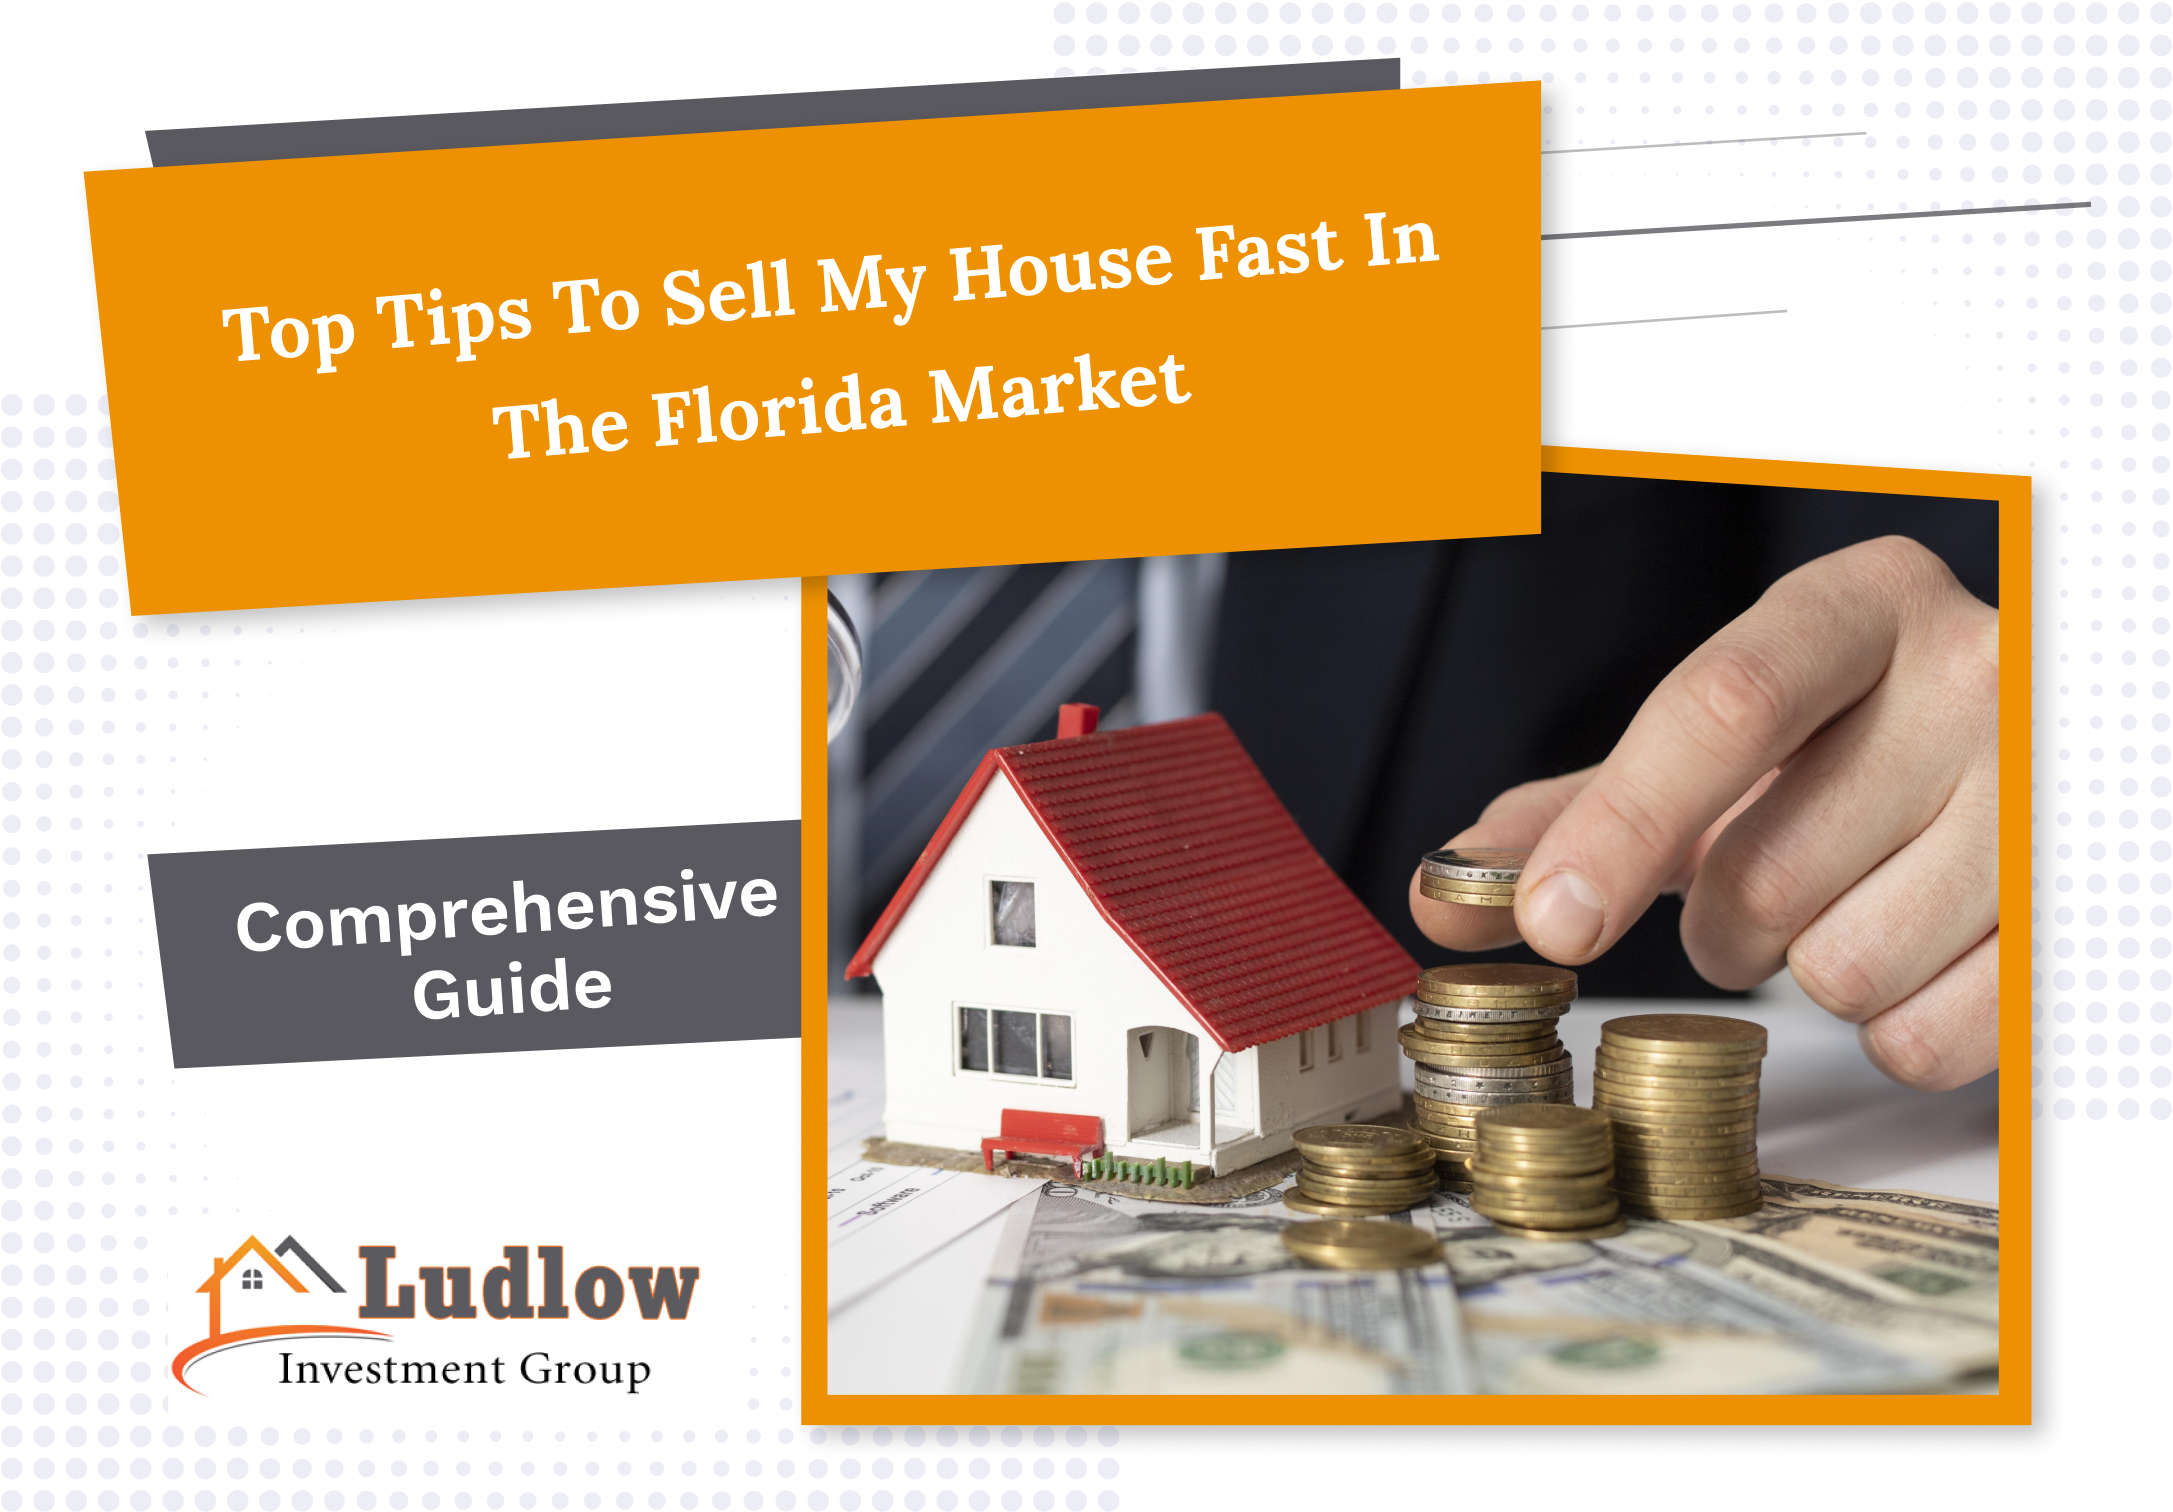 Top Tips to Sell My House Fast in the Florida Market